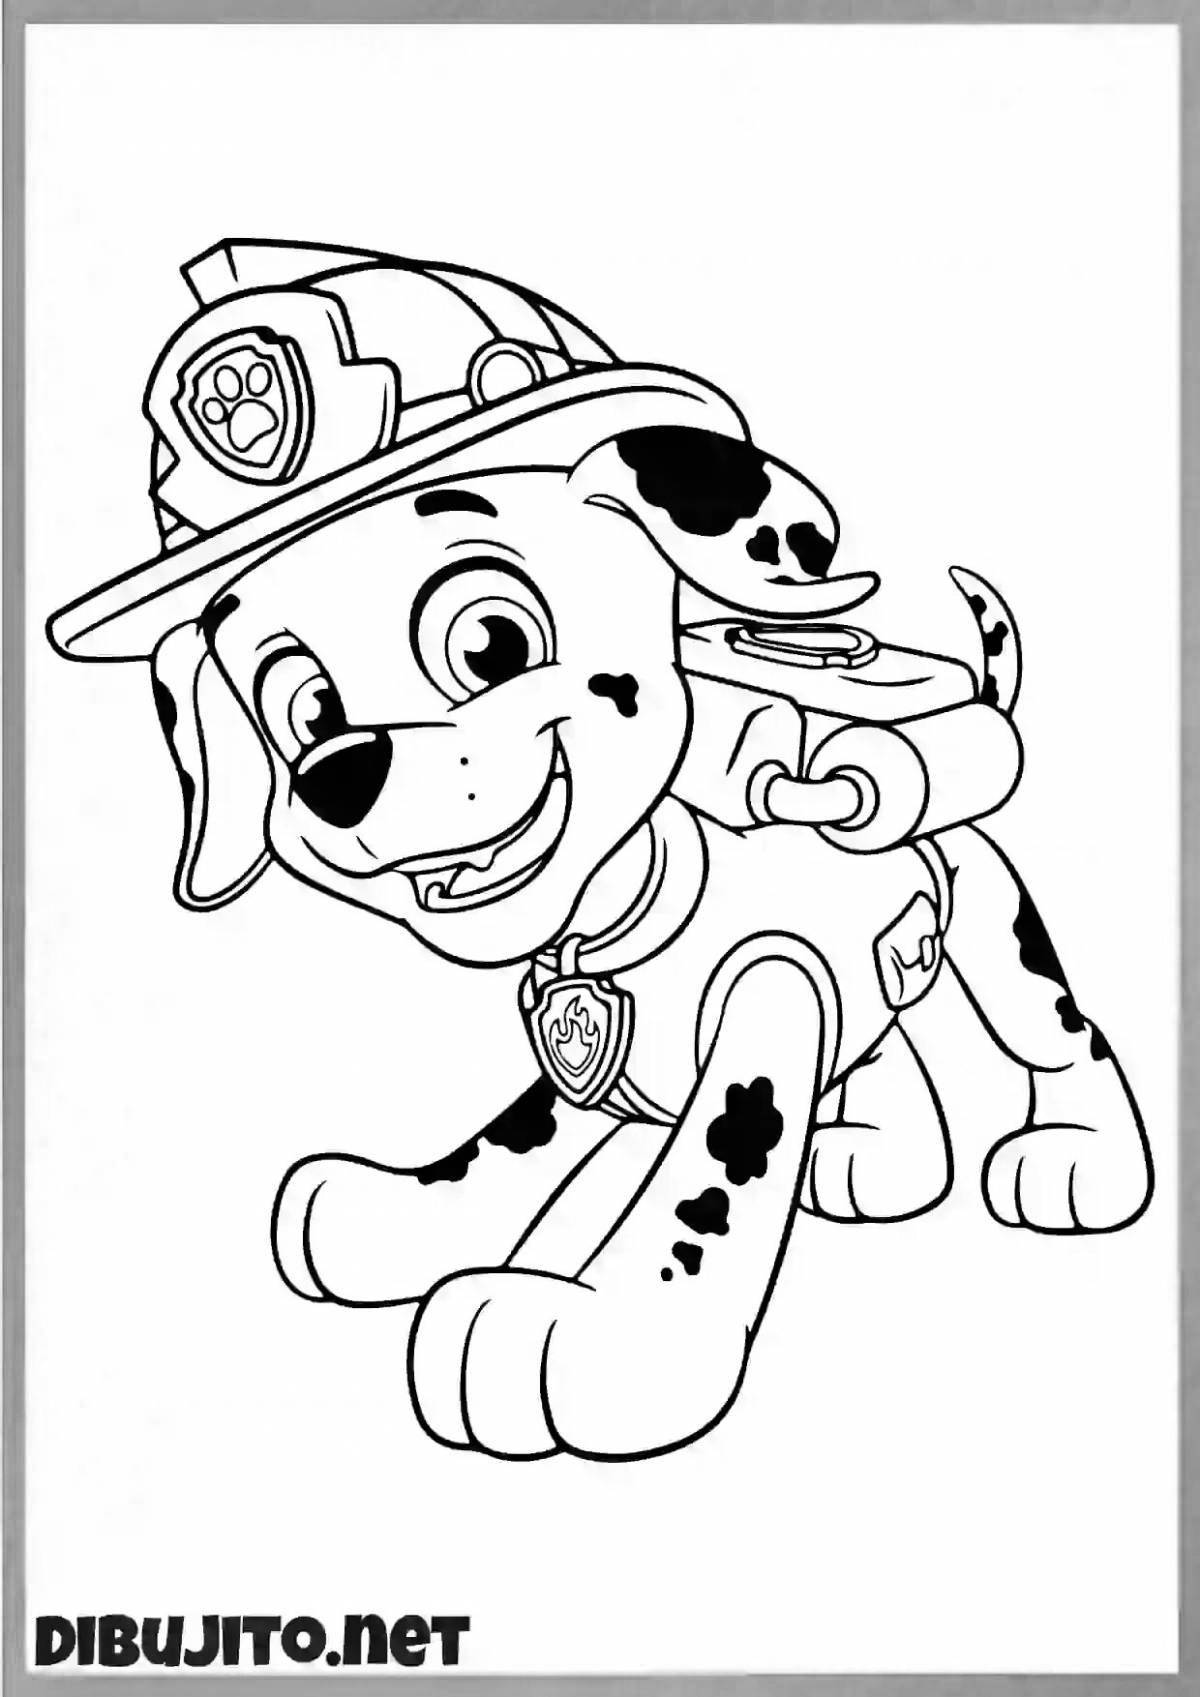 Cute marshal coloring book for kids